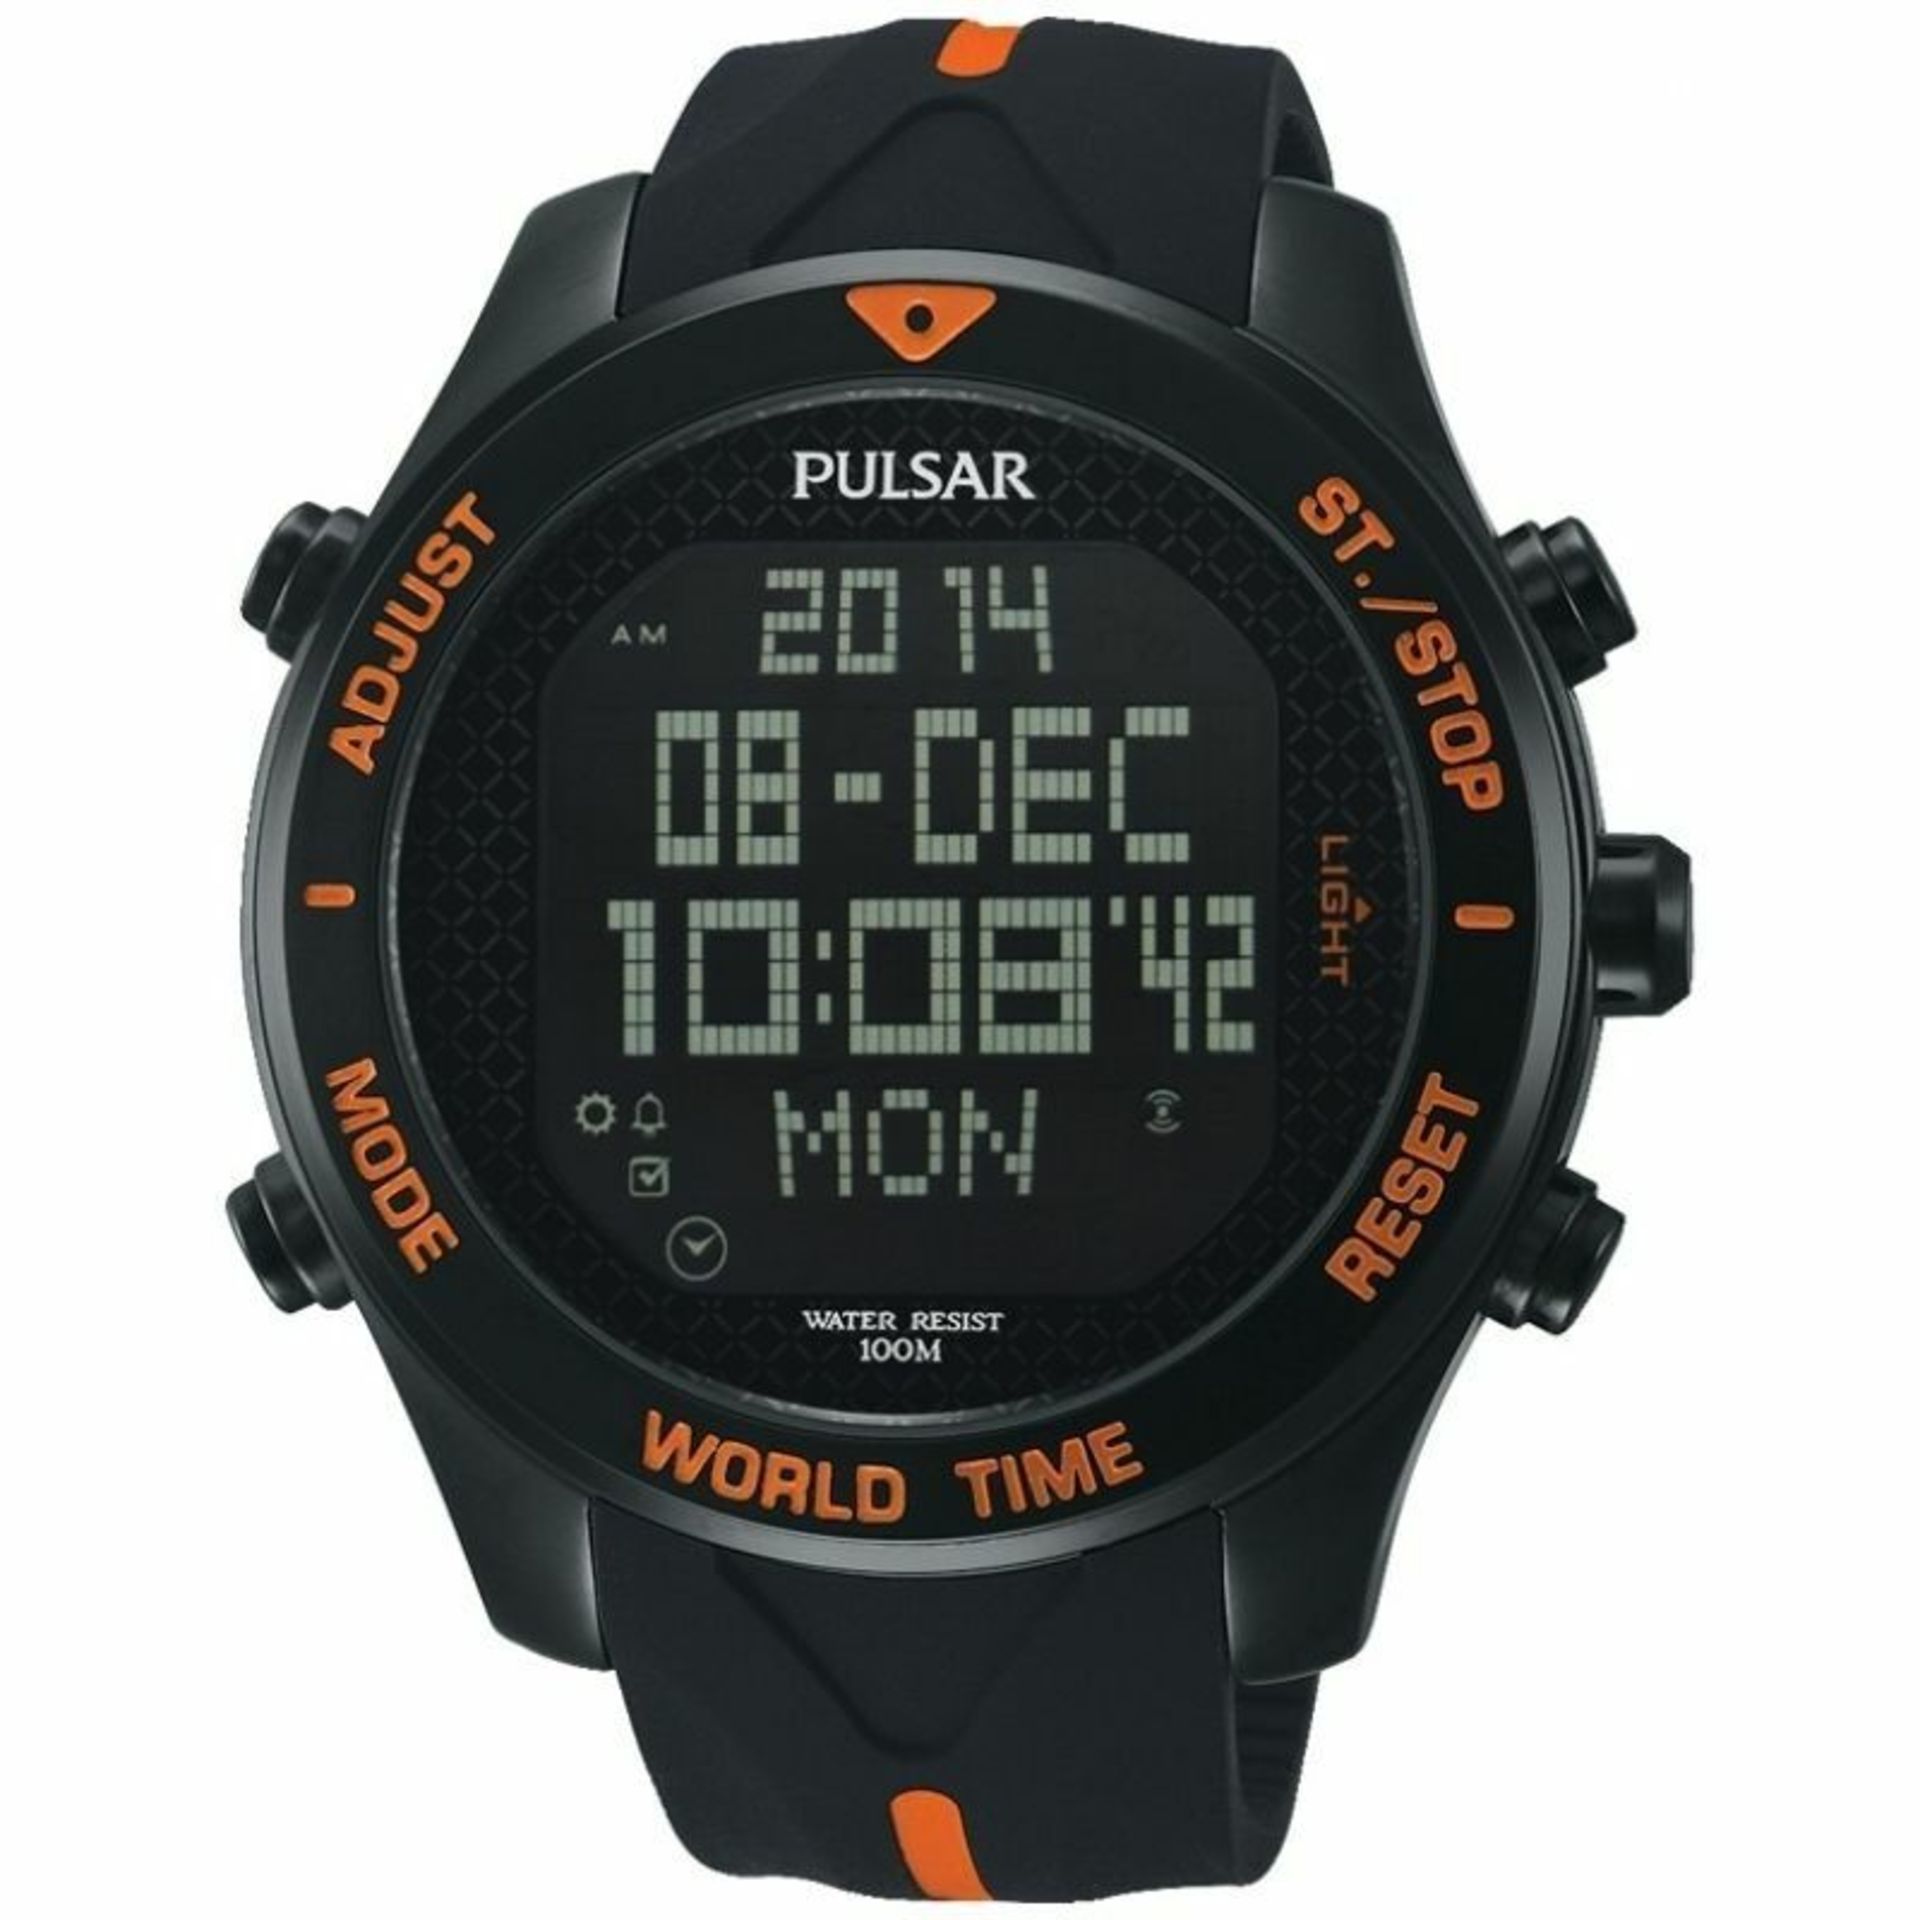 Pulsar Gents Digital Rubber Strap Multi-Function Sports Watch PQ2037 - Image 2 of 3